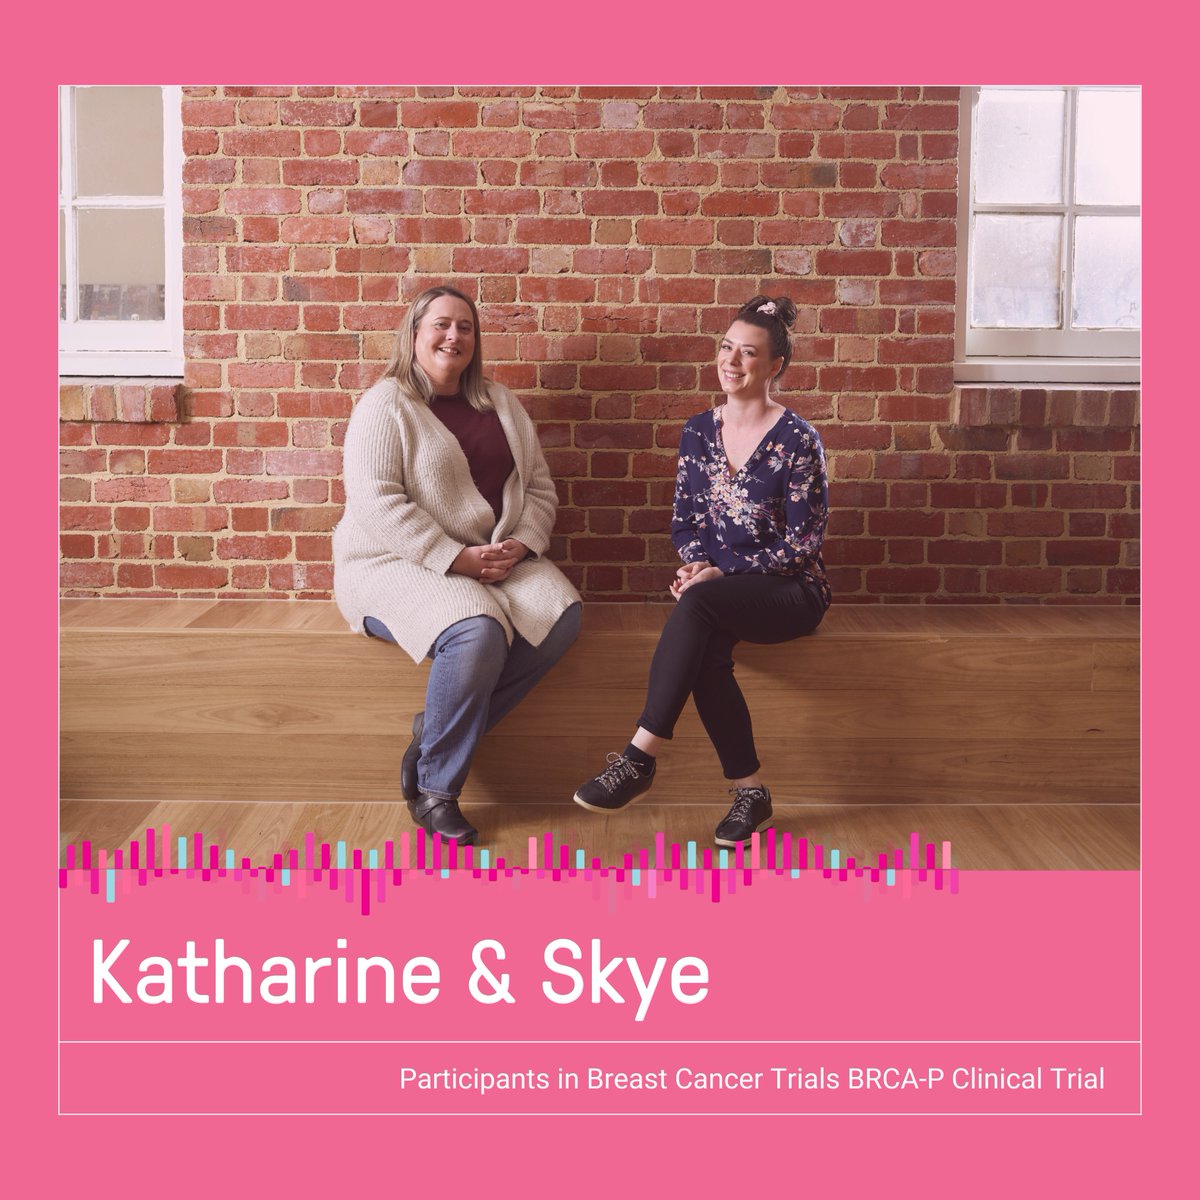 Katharine and Skye both carry the BRCA-1 gene mutation, and are participants in the BRCA-P trial, testing the effectiveness of a drug called denosumab in preventing breast cancer for these women. To find out more about Katharine and Skye's stories, visit: youtube.com/watch?v=Mbqf_w…